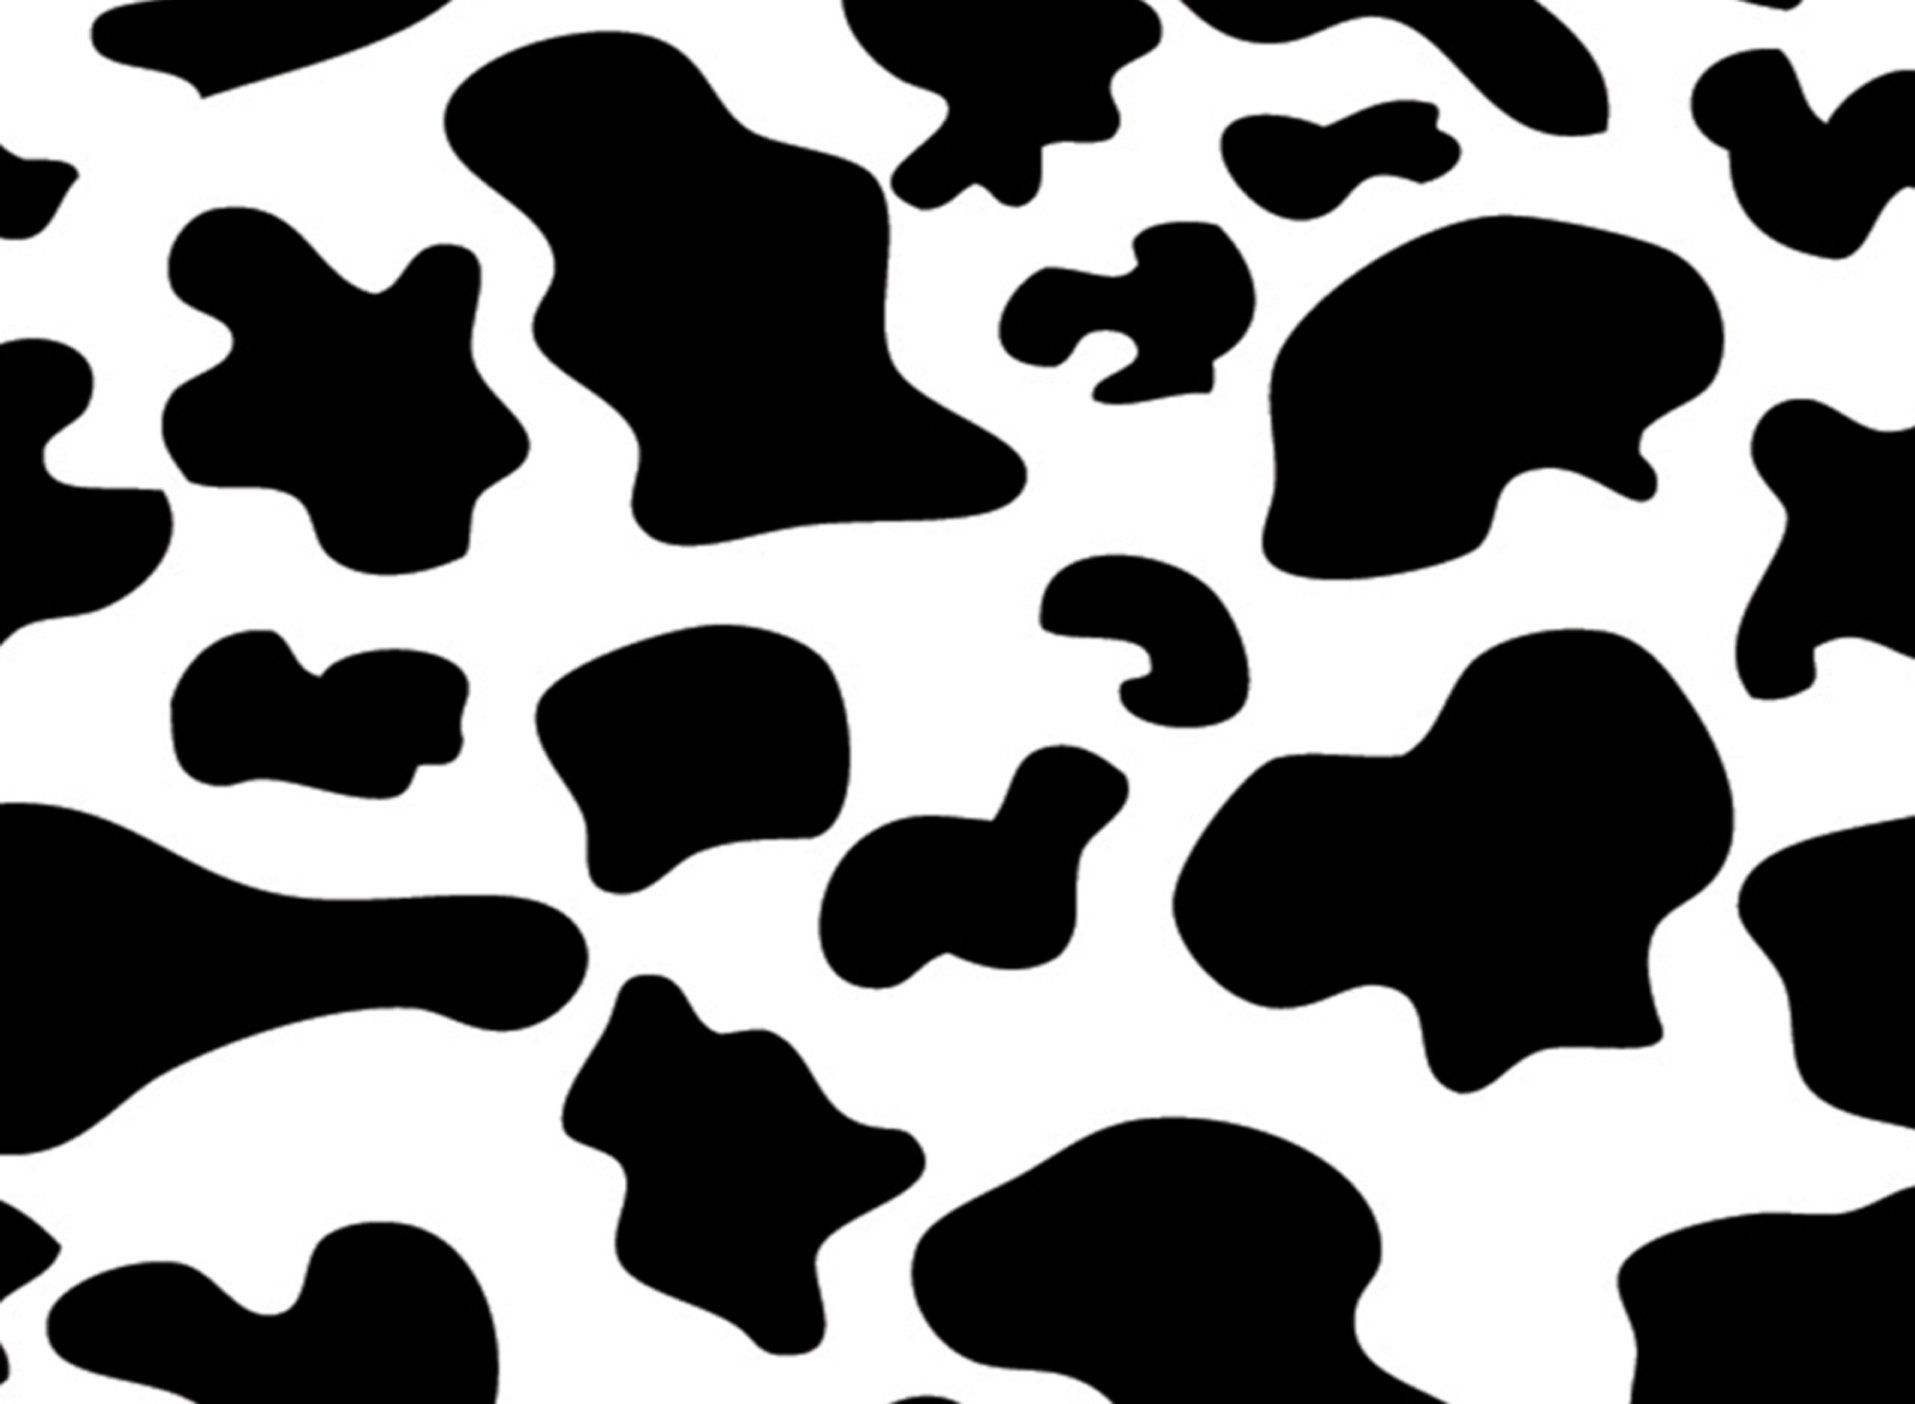 A black and white cow pattern on a plain background - Cow